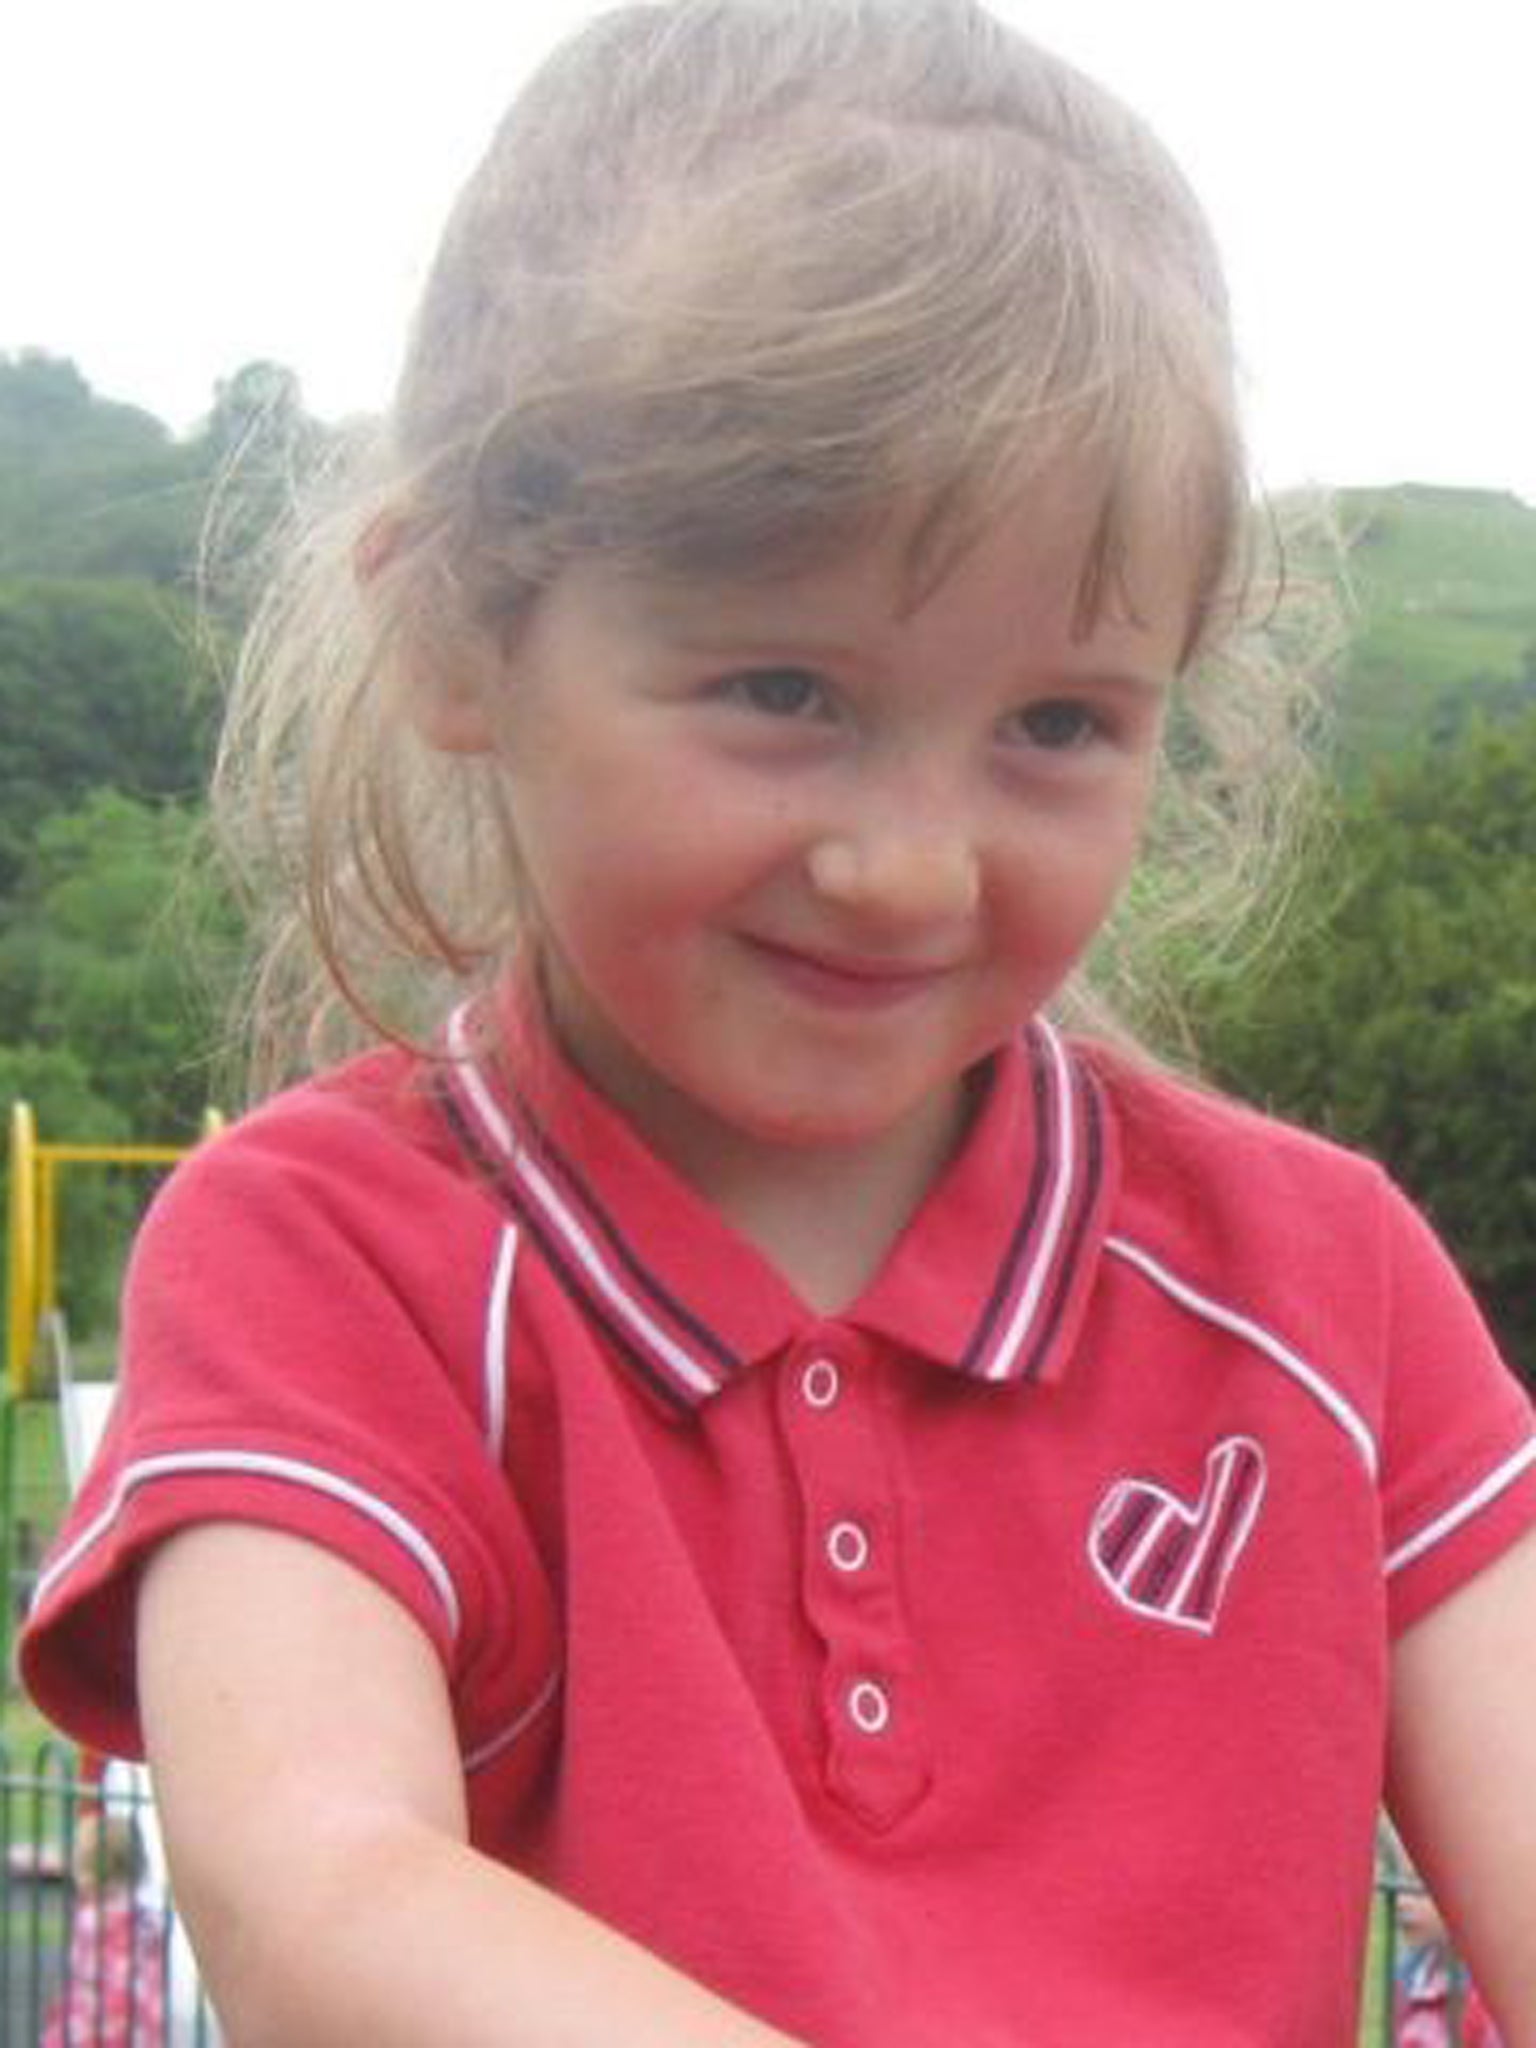 Five-year-old April was last seen playing out on her bike close to her home in Machynlleth, mid Wales, on the evening of October 1